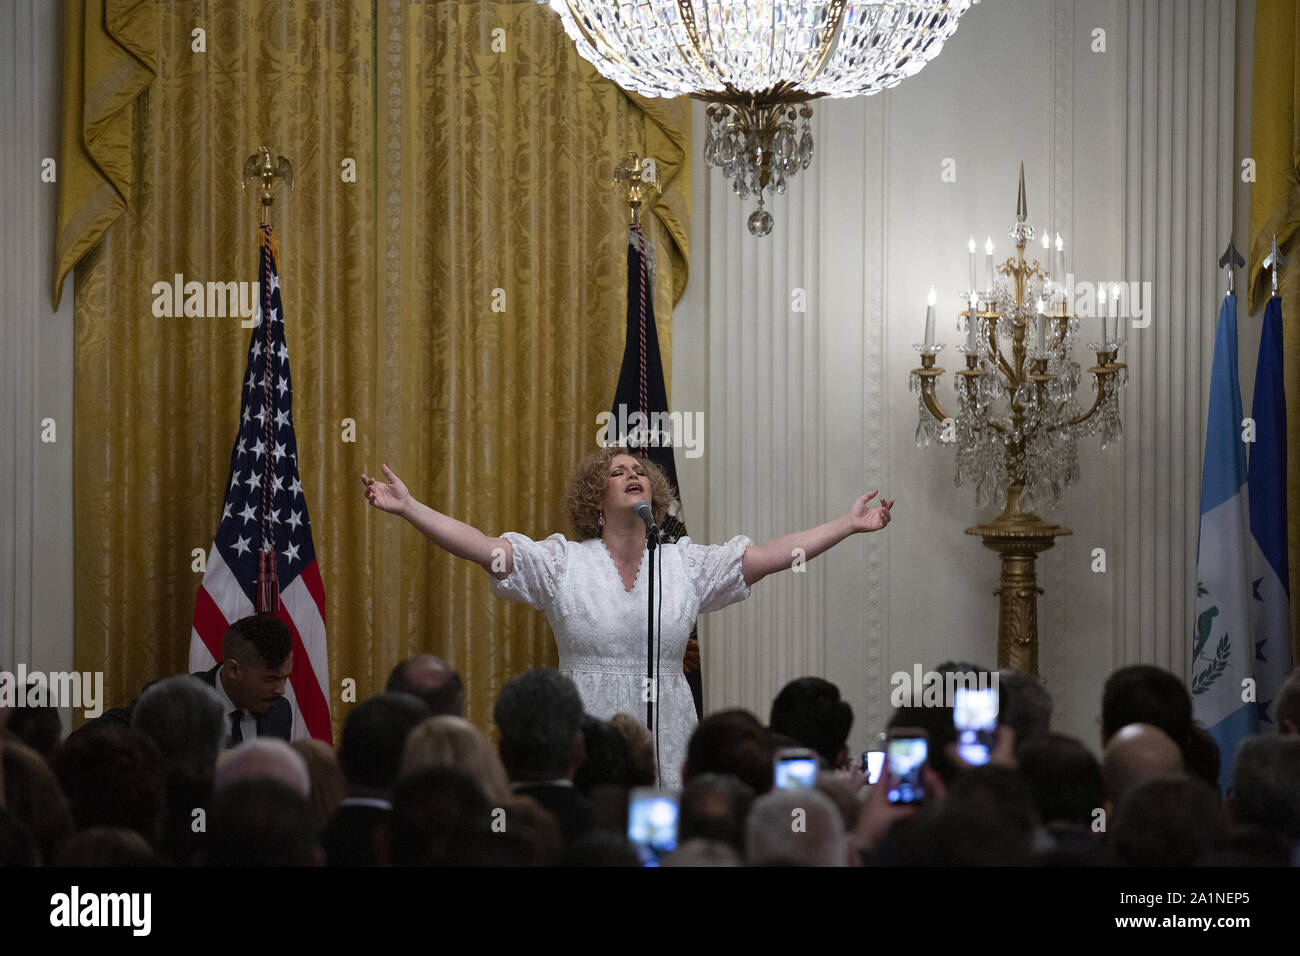 Washington, District of Columbia, USA. 27th Sep, 2019. Christine D'Clario sings during the Hispanic Heritage Month reception at the White House in Washington, DC, U.S. on September 27, 2019. Credit: Stefani Reynolds/CNP/ZUMA Wire/Alamy Live News Stock Photo